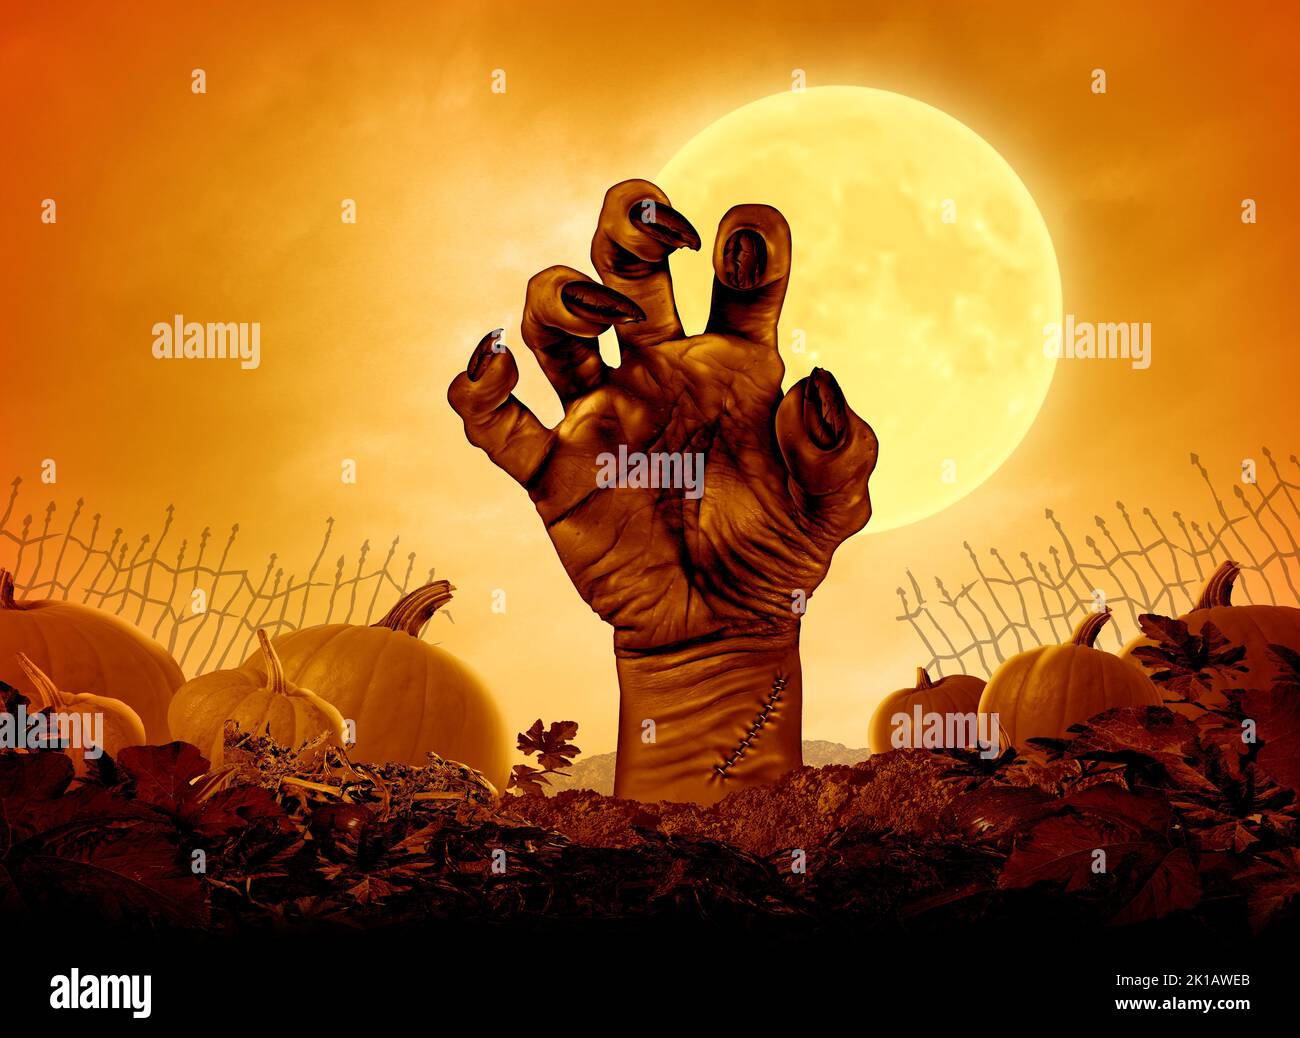 Halloween monster night poster and Autumn party background with a scary zombie hand with a yellow moon glowing on a grungy old creepy pumpkin patch. Stock Photo